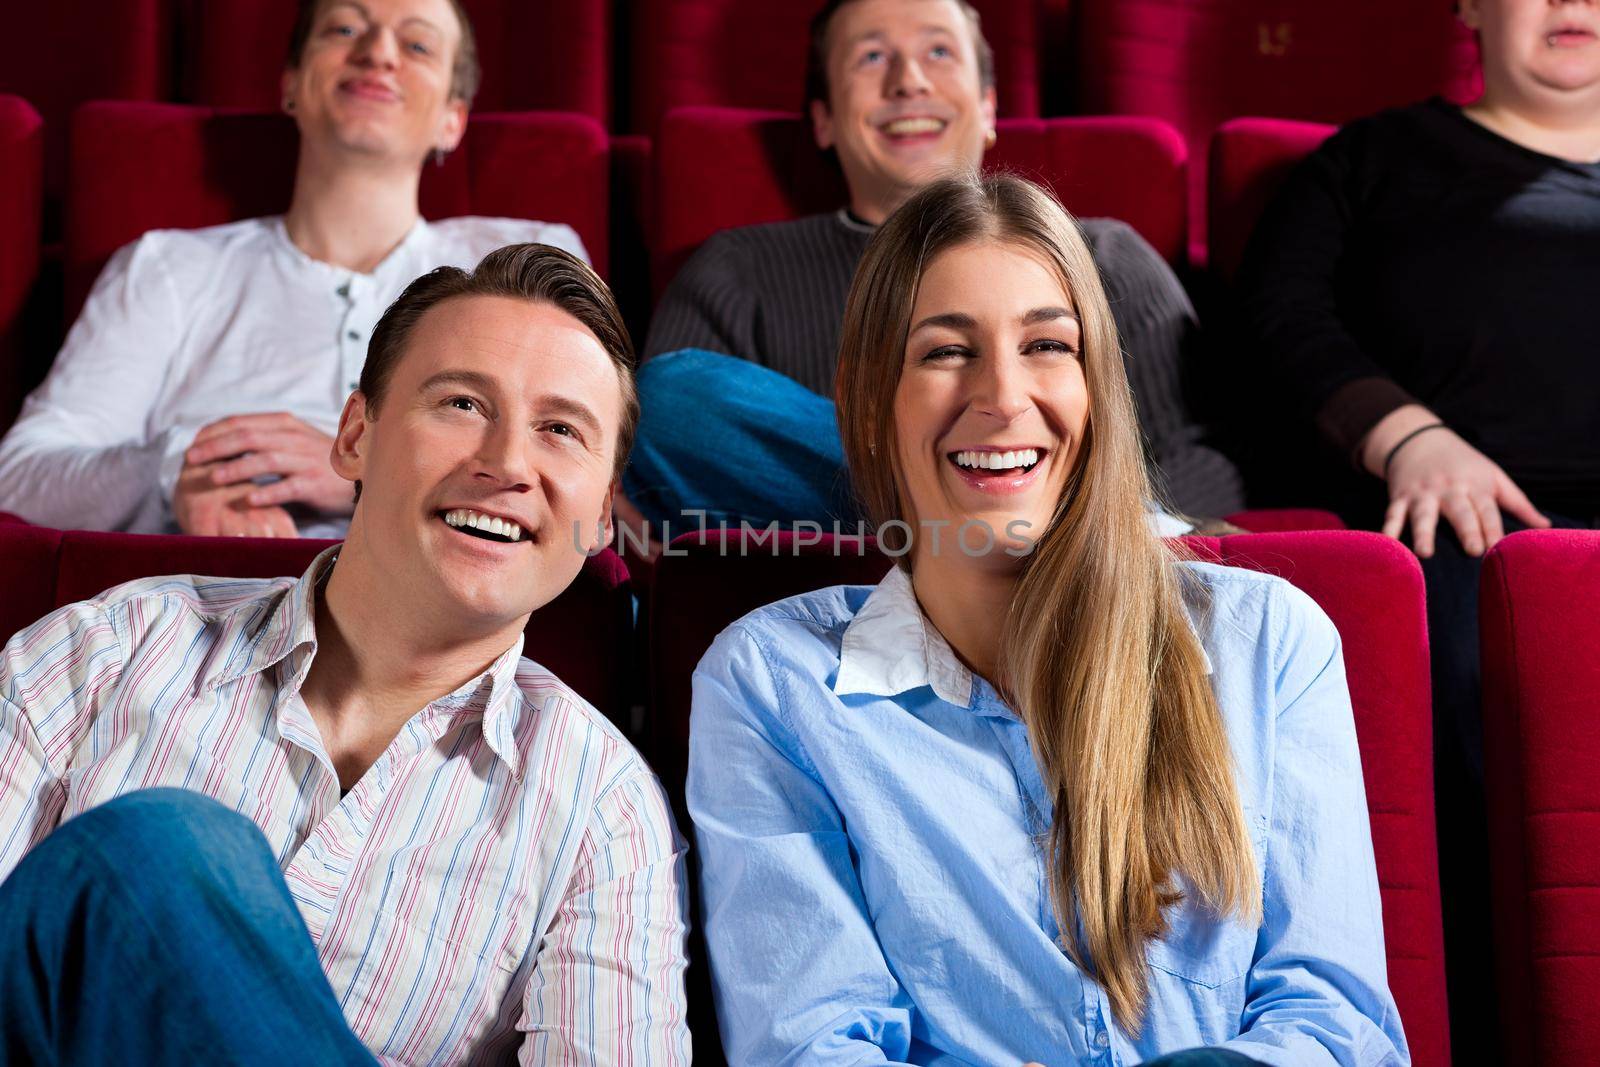 Couple and other people, probably friends, in cinema watching a movie, it seems to be a funny movie